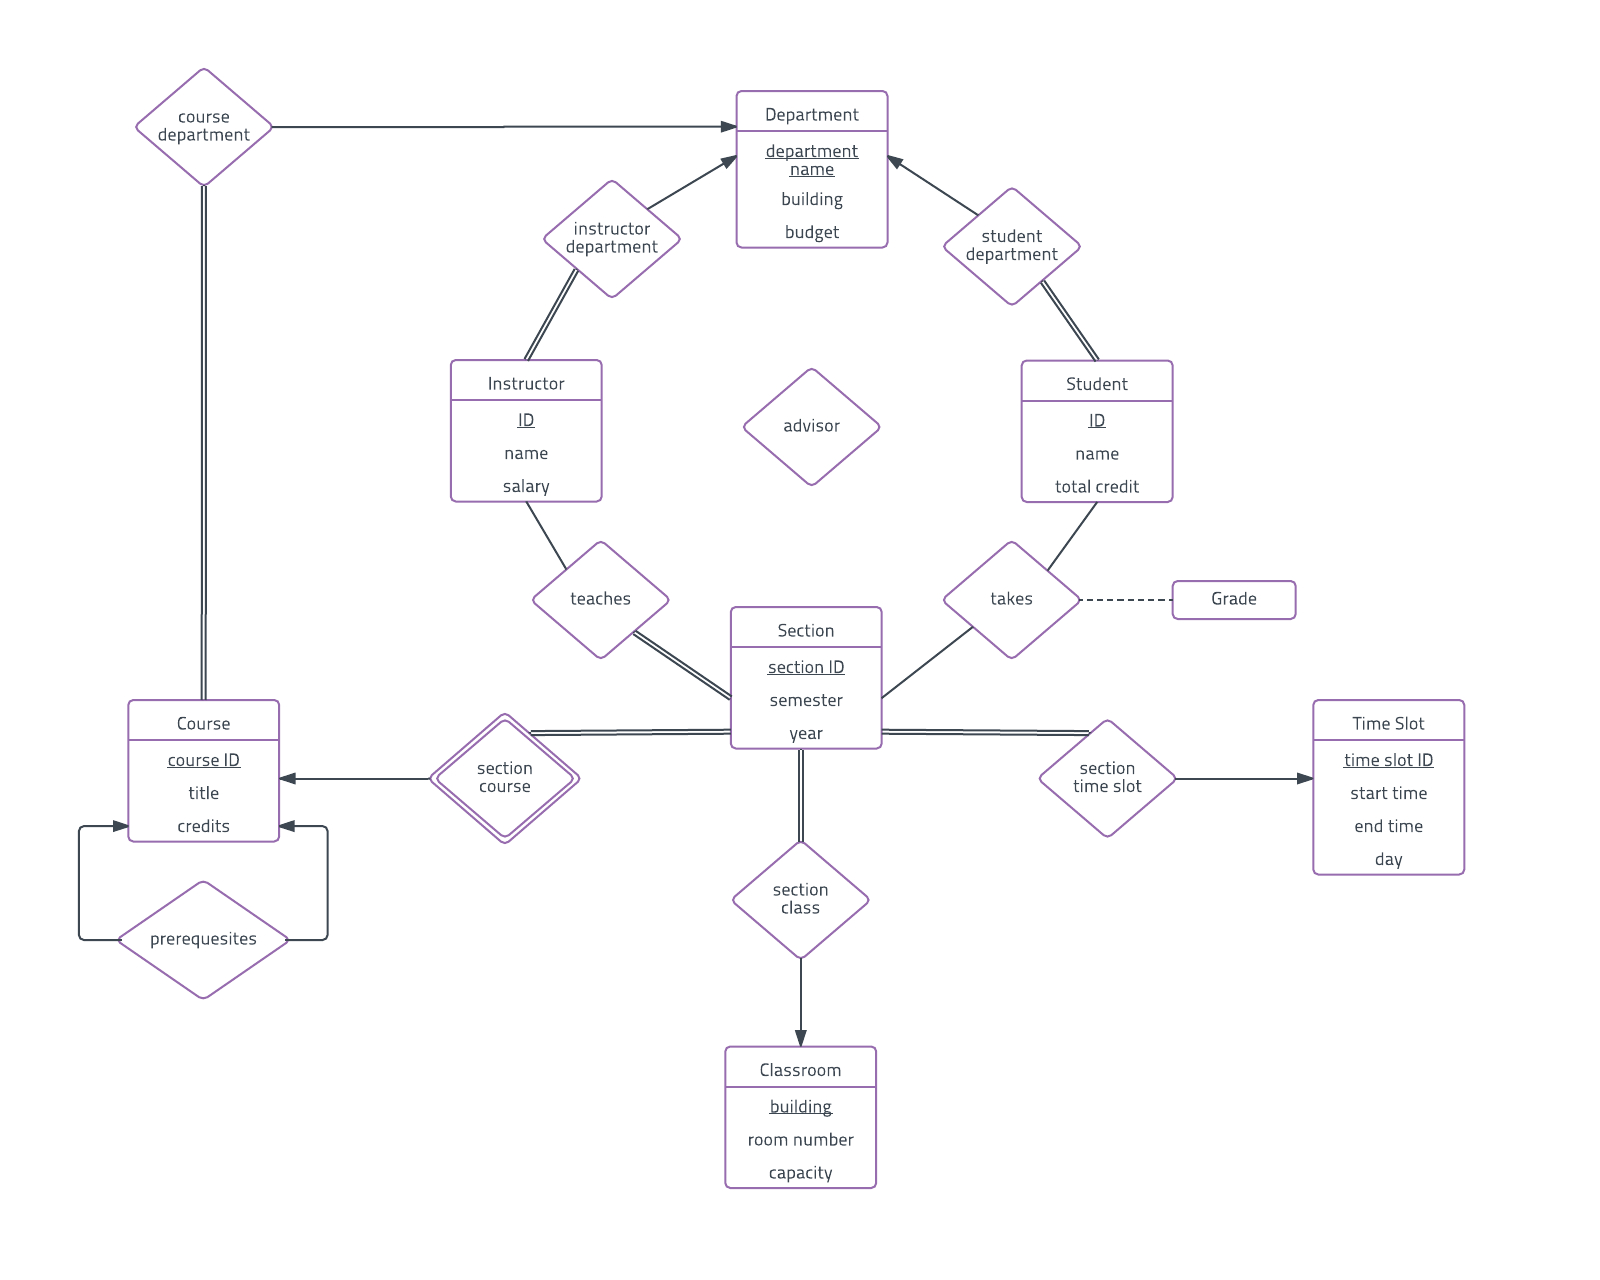 Er Diagram Examples And Templates | Lucidchart in Database Er Diagram Examples